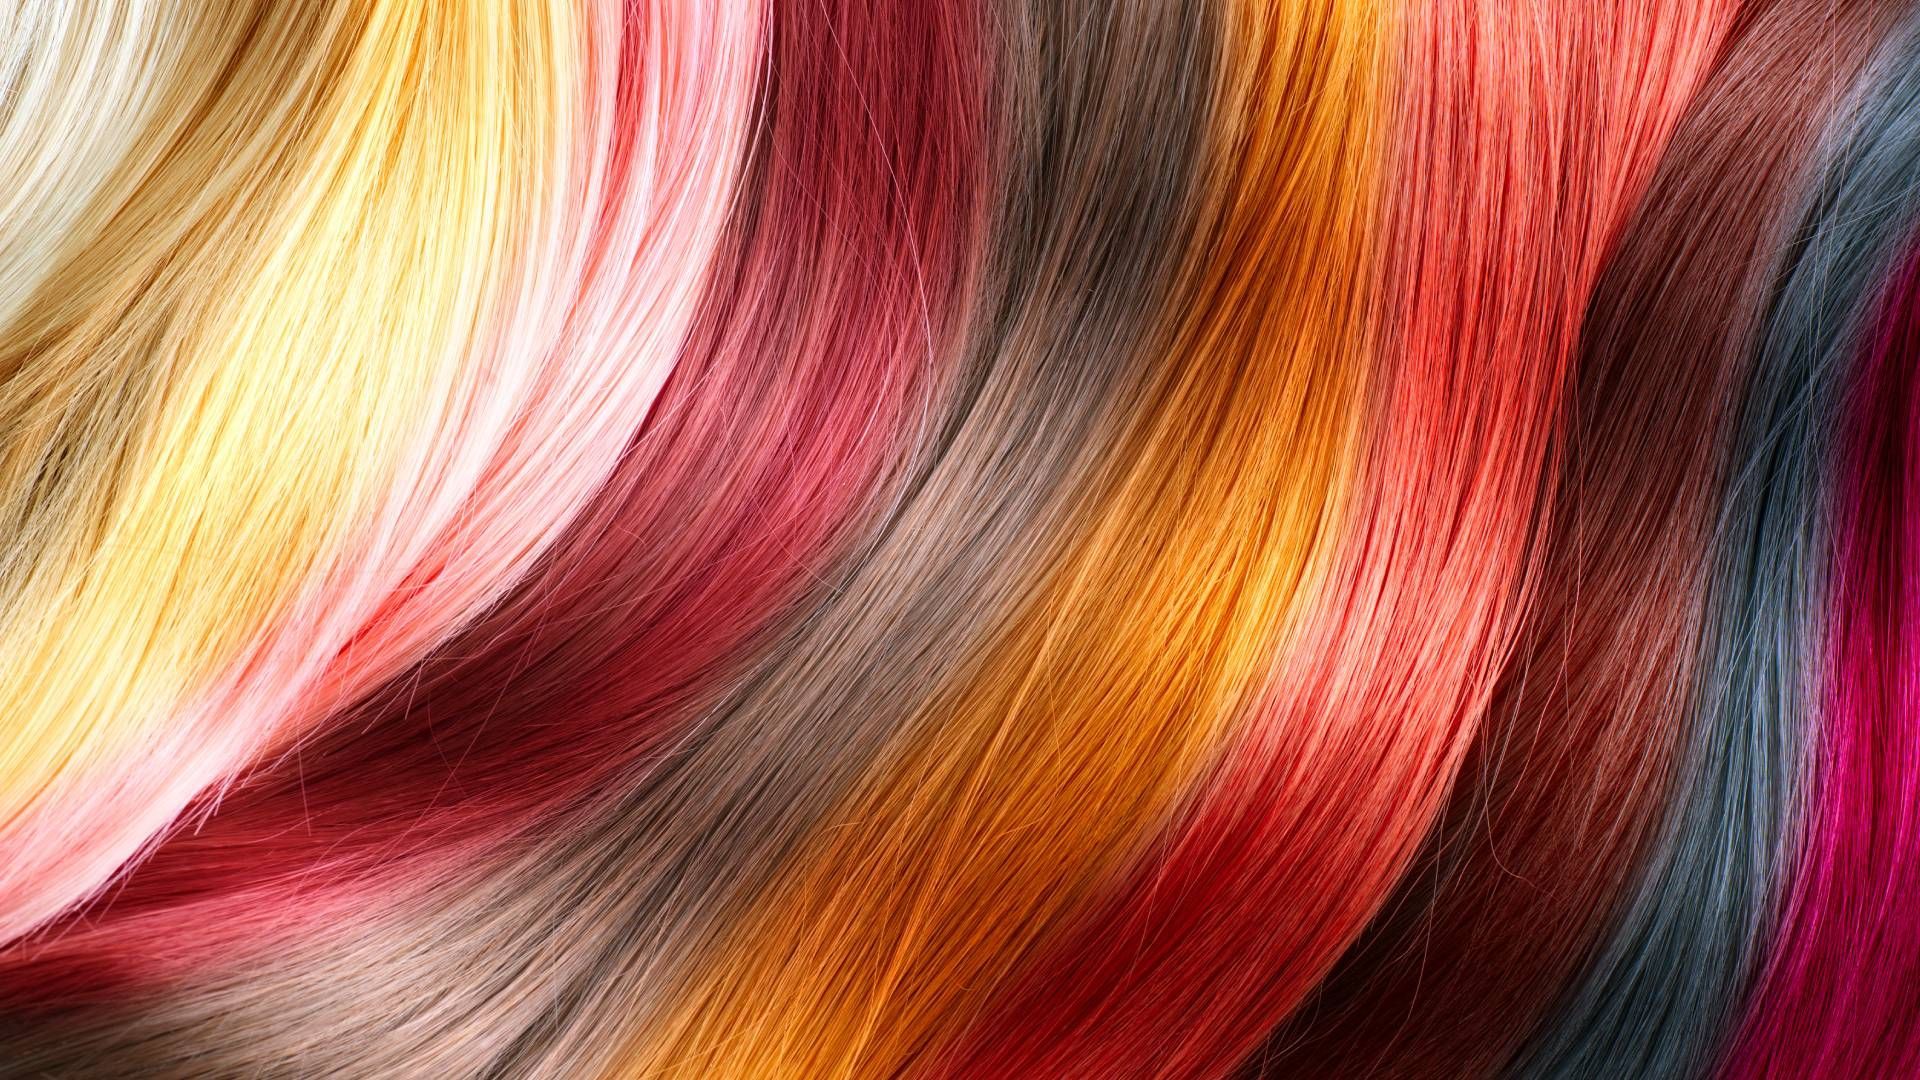 Samples of differently-colored hair dyes for the summer near Lexington, Kentucky (KY)